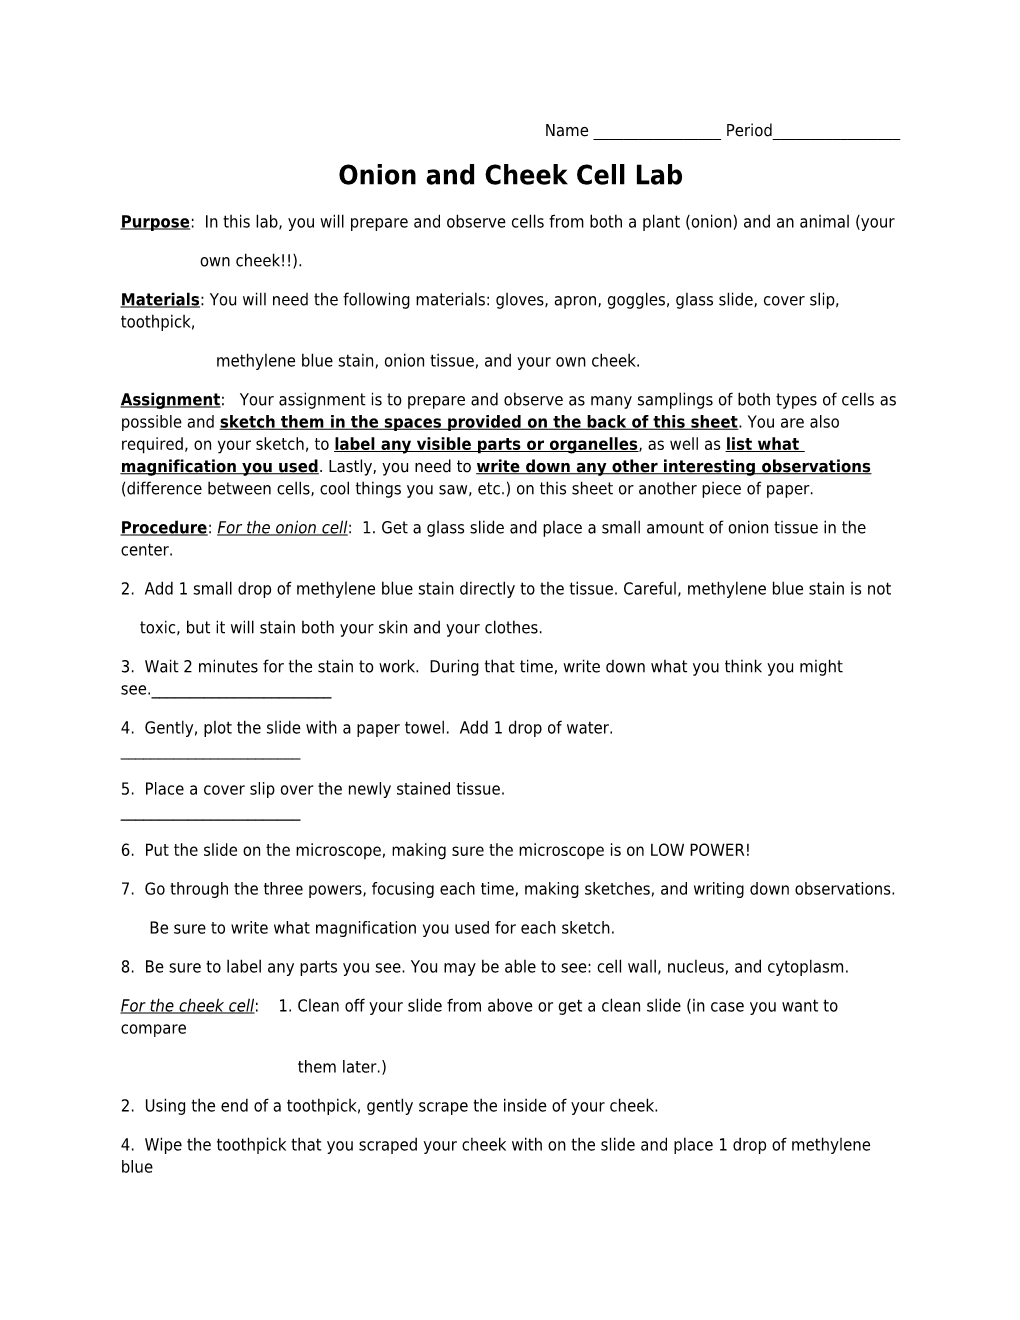 Onion and Cheek Cell Lab